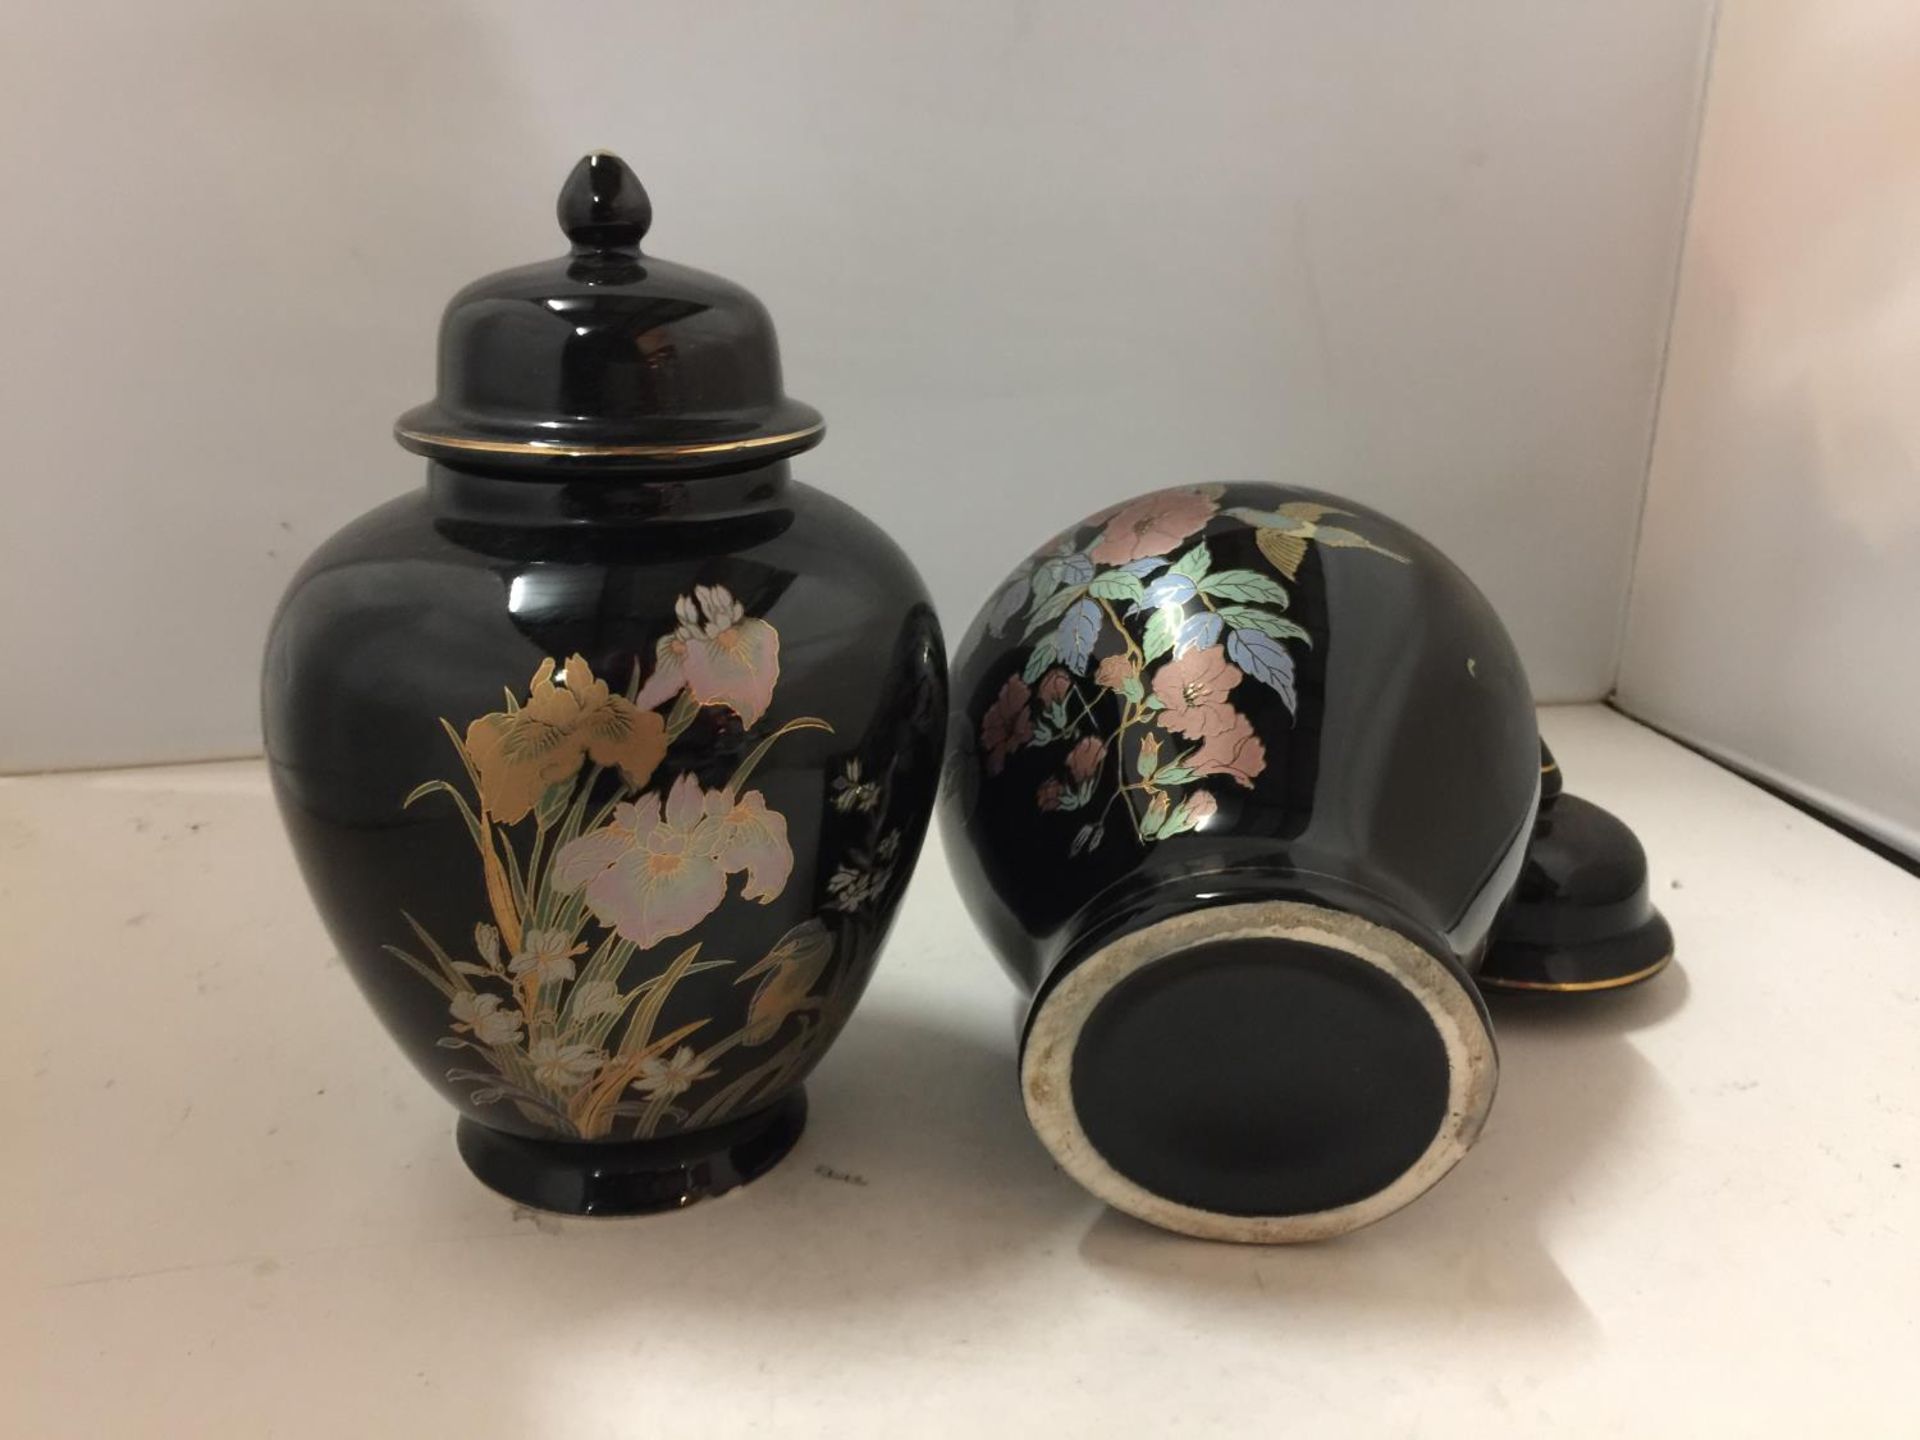 TWO BLACK GLAZED LIDDED STORAGE JARS WITH KINGFISHER AND FLORAL DESIGNS - Image 2 of 3